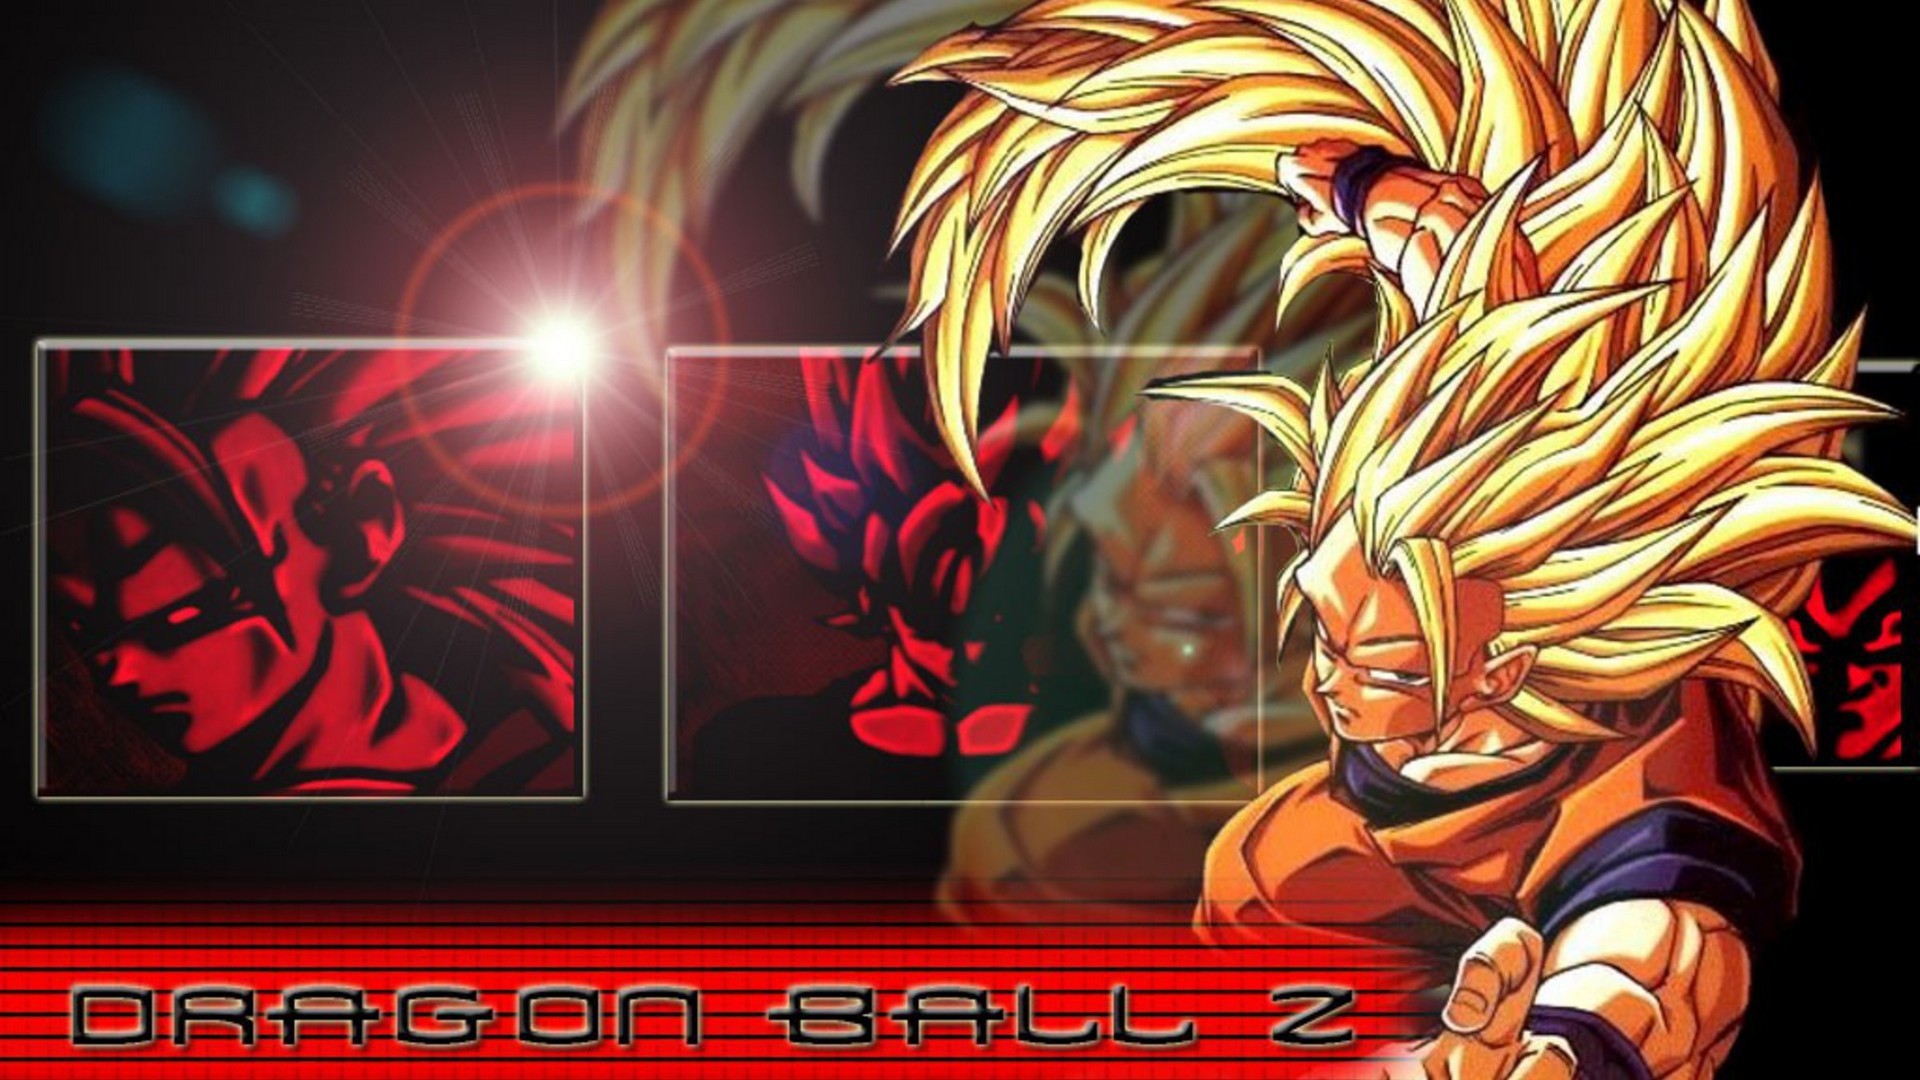 Wallpaper Goku SSJ3 Desktop with resolution 1920X1080 pixel. You can use this wallpaper as background for your desktop Computer Screensavers, Android or iPhone smartphones